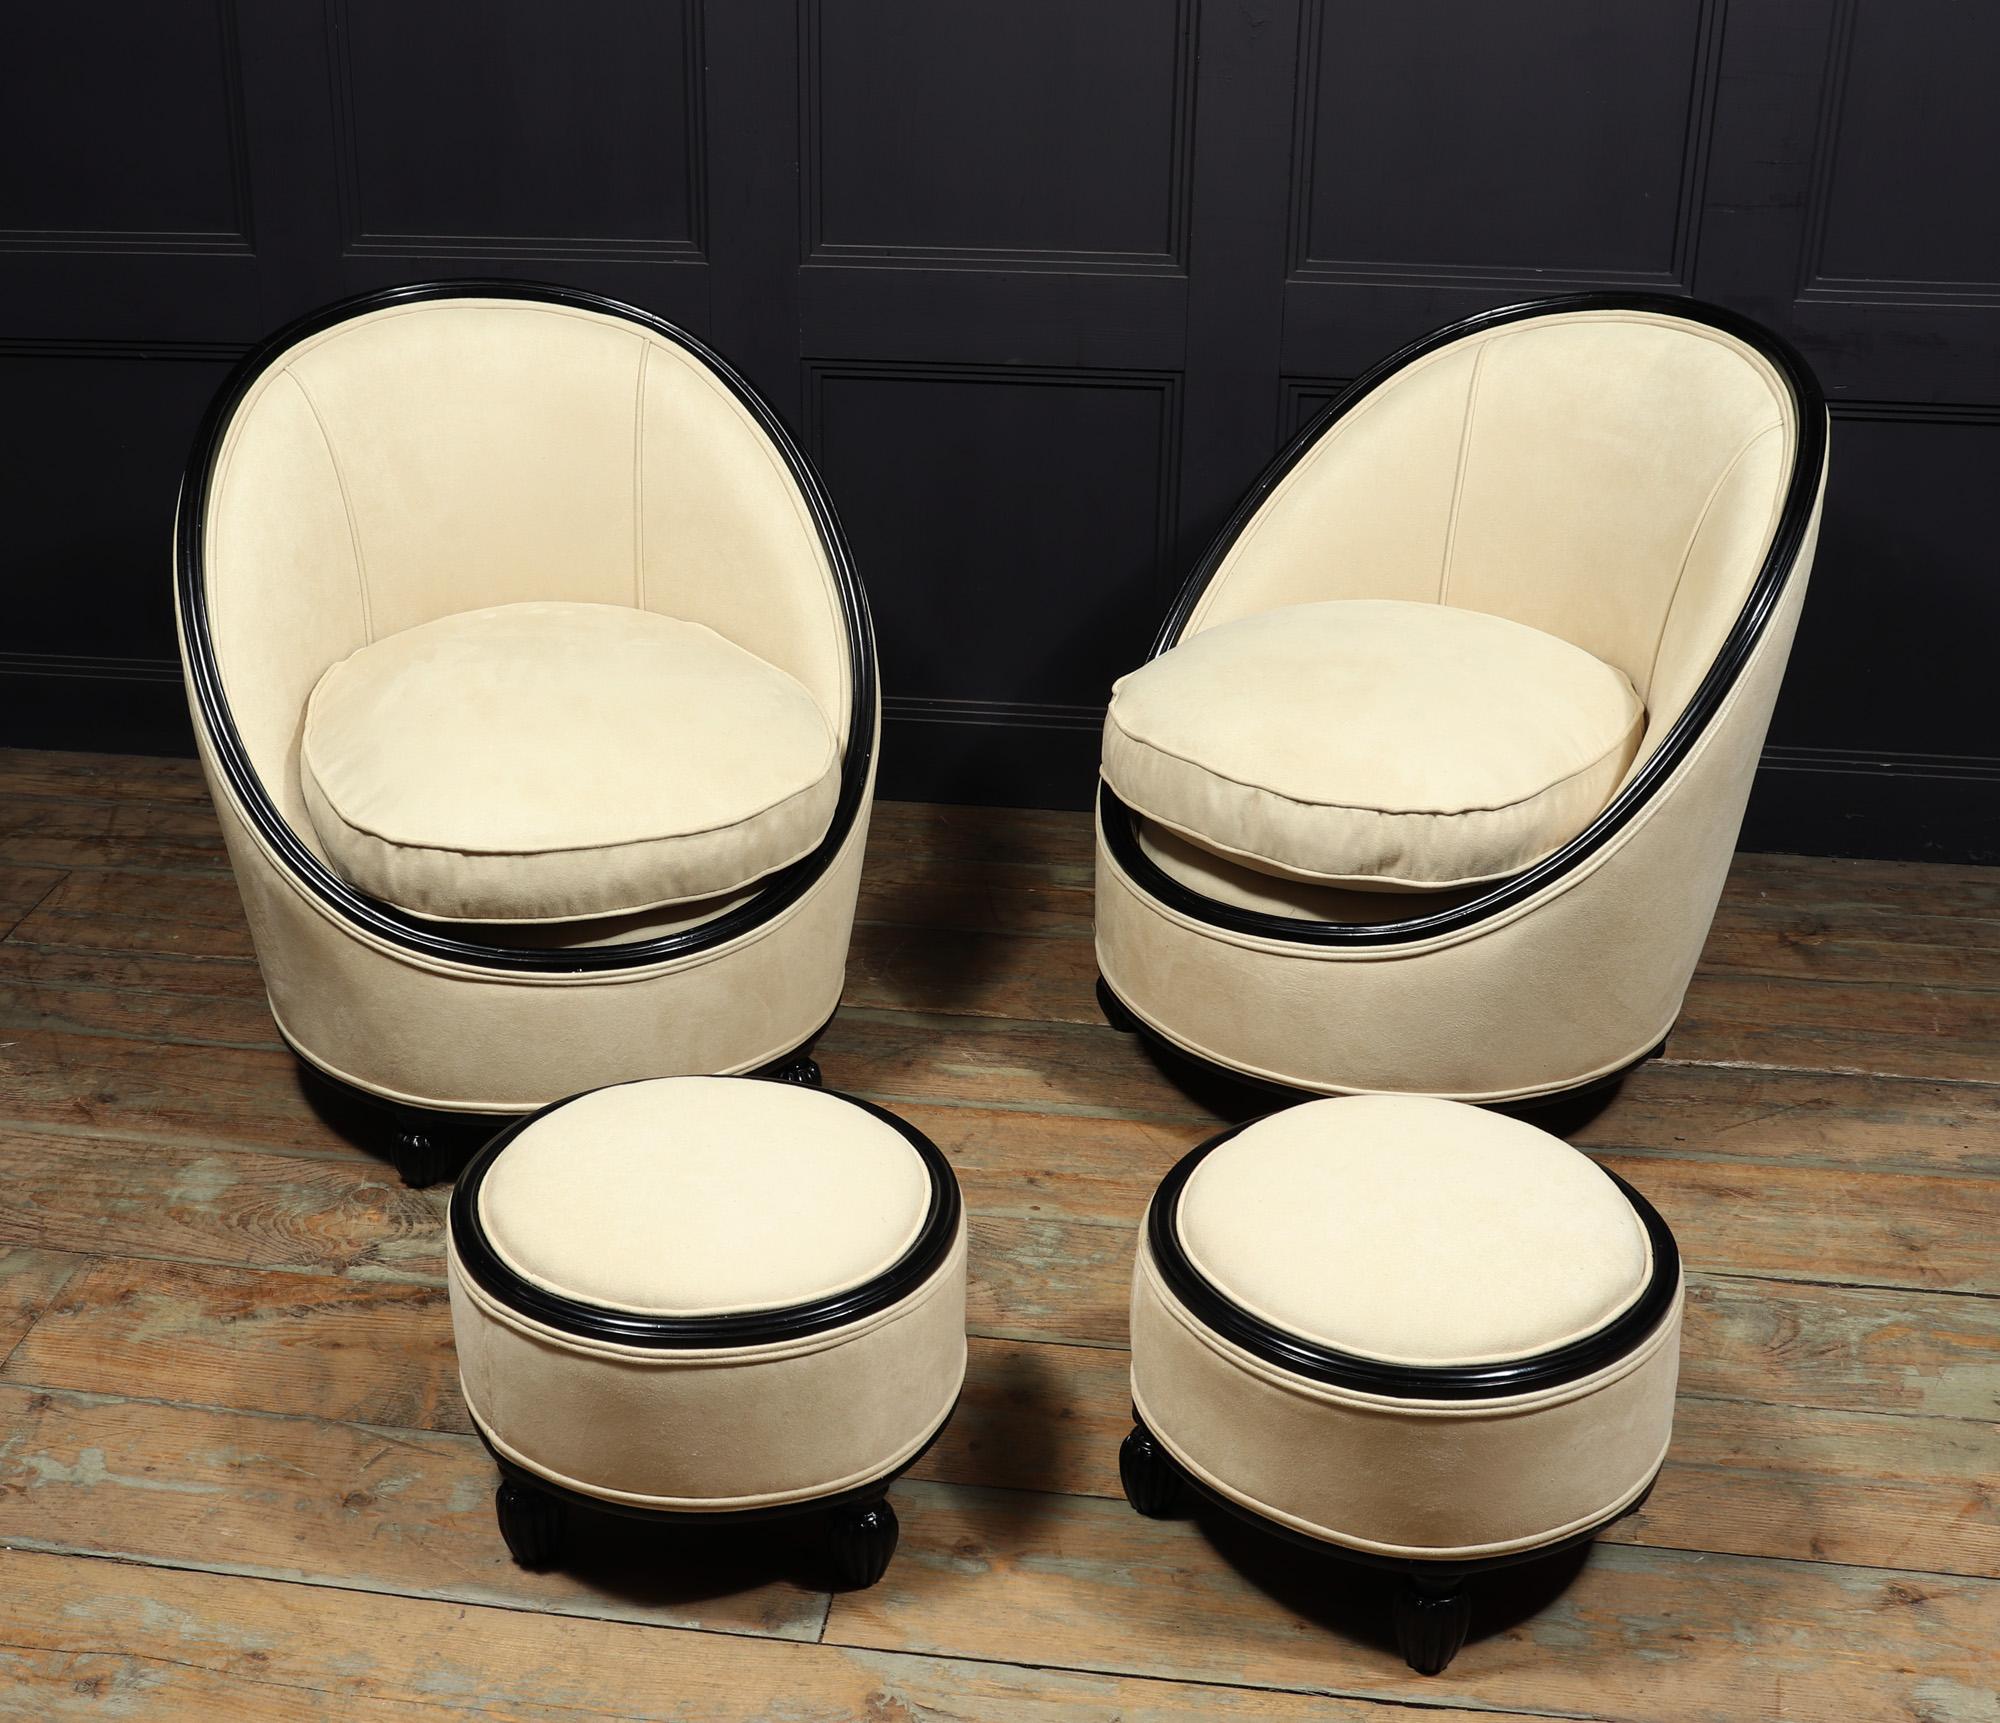 Early 20th Century French Art Deco Salon Chairs Manner of Ruhlman c1925 For Sale